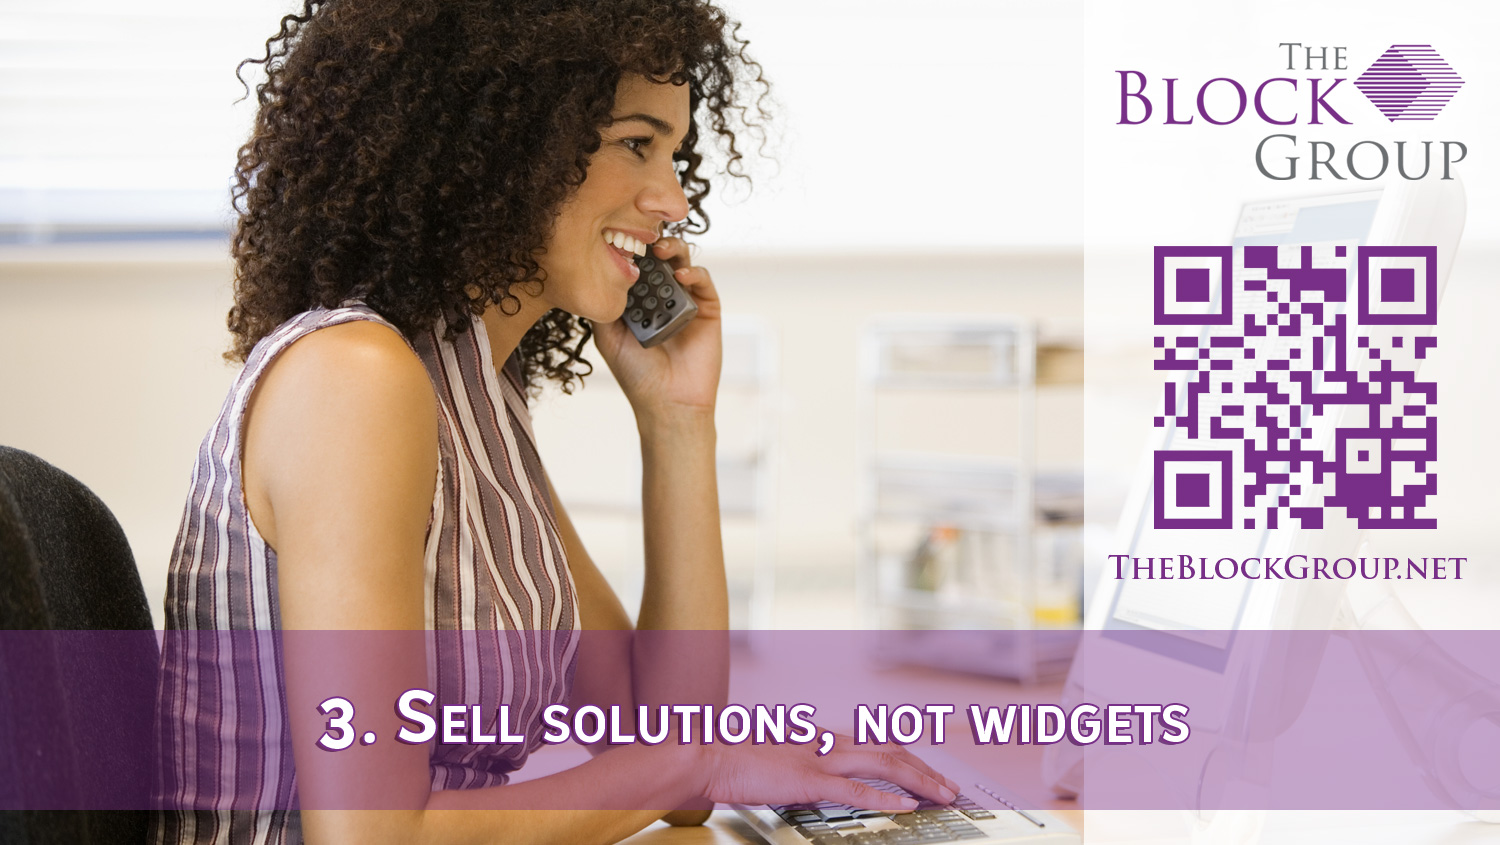 003.-Sell solutions not widgets